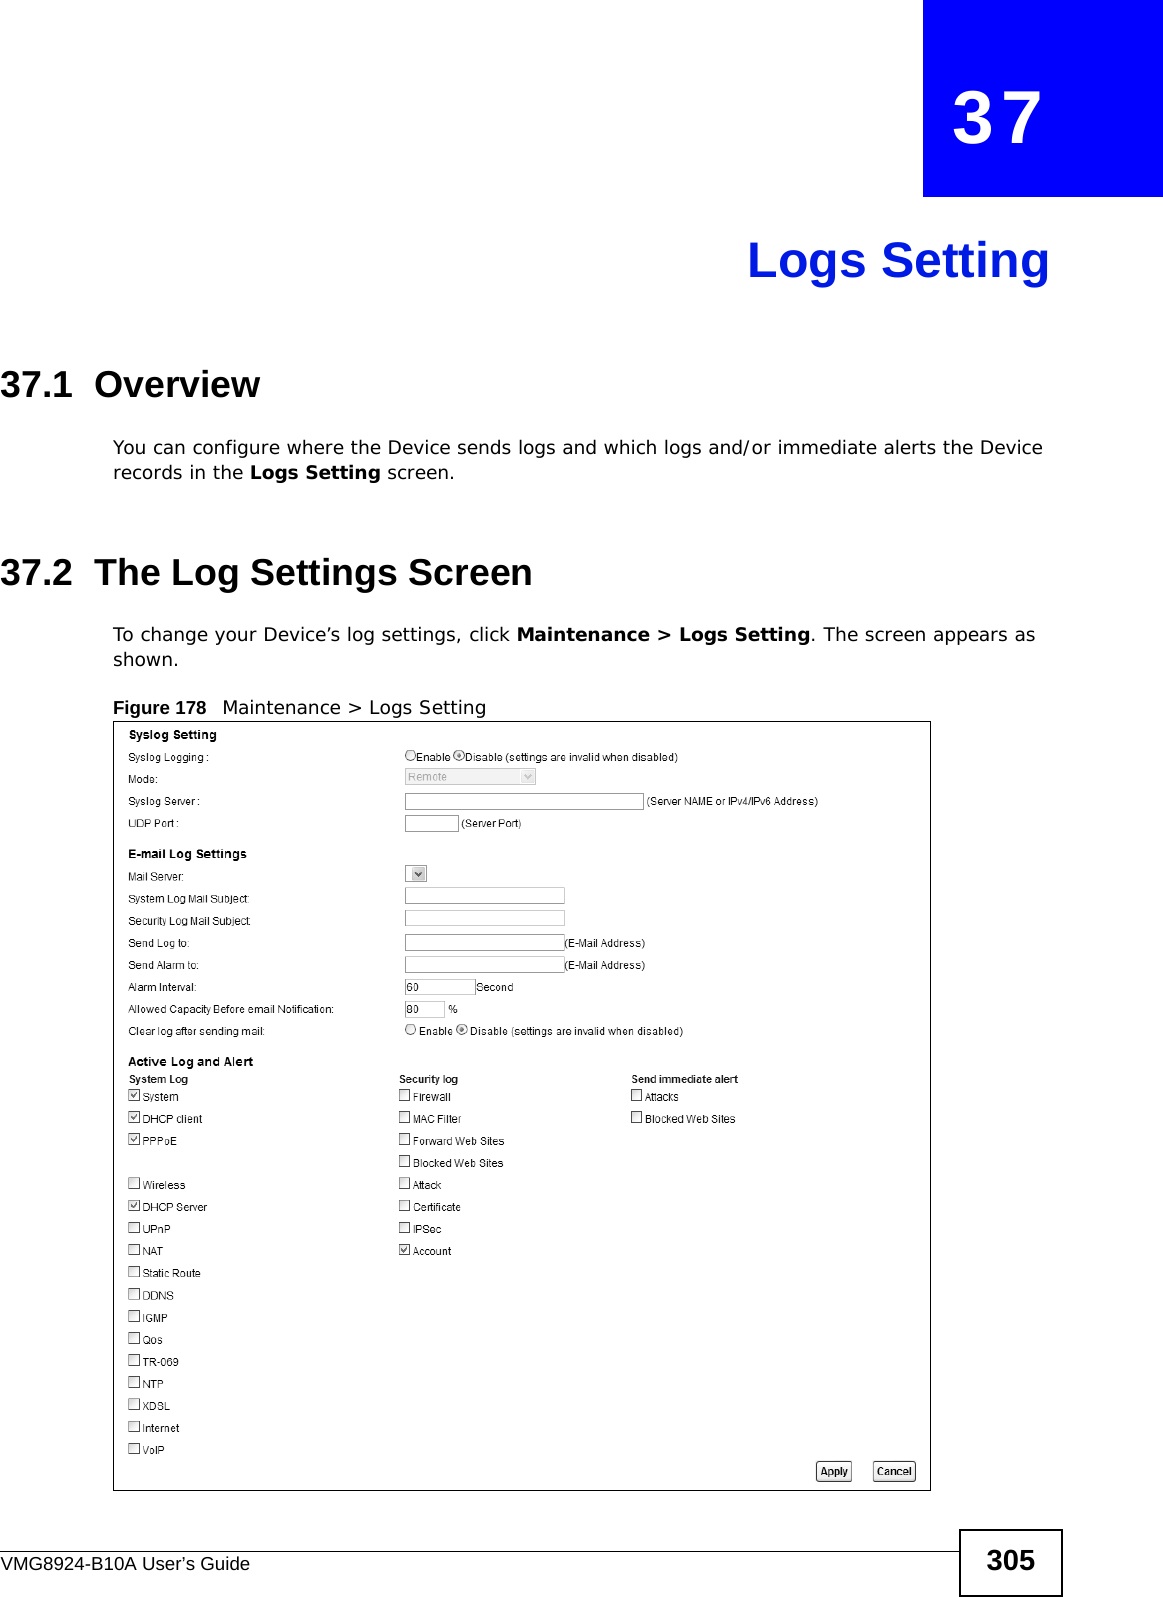 VMG8924-B10A User’s Guide 305CHAPTER   37Logs Setting37.1  Overview You can configure where the Device sends logs and which logs and/or immediate alerts the Device records in the Logs Setting screen.37.2  The Log Settings ScreenTo change your Device’s log settings, click Maintenance &gt; Logs Setting. The screen appears as shown.Figure 178   Maintenance &gt; Logs Setting